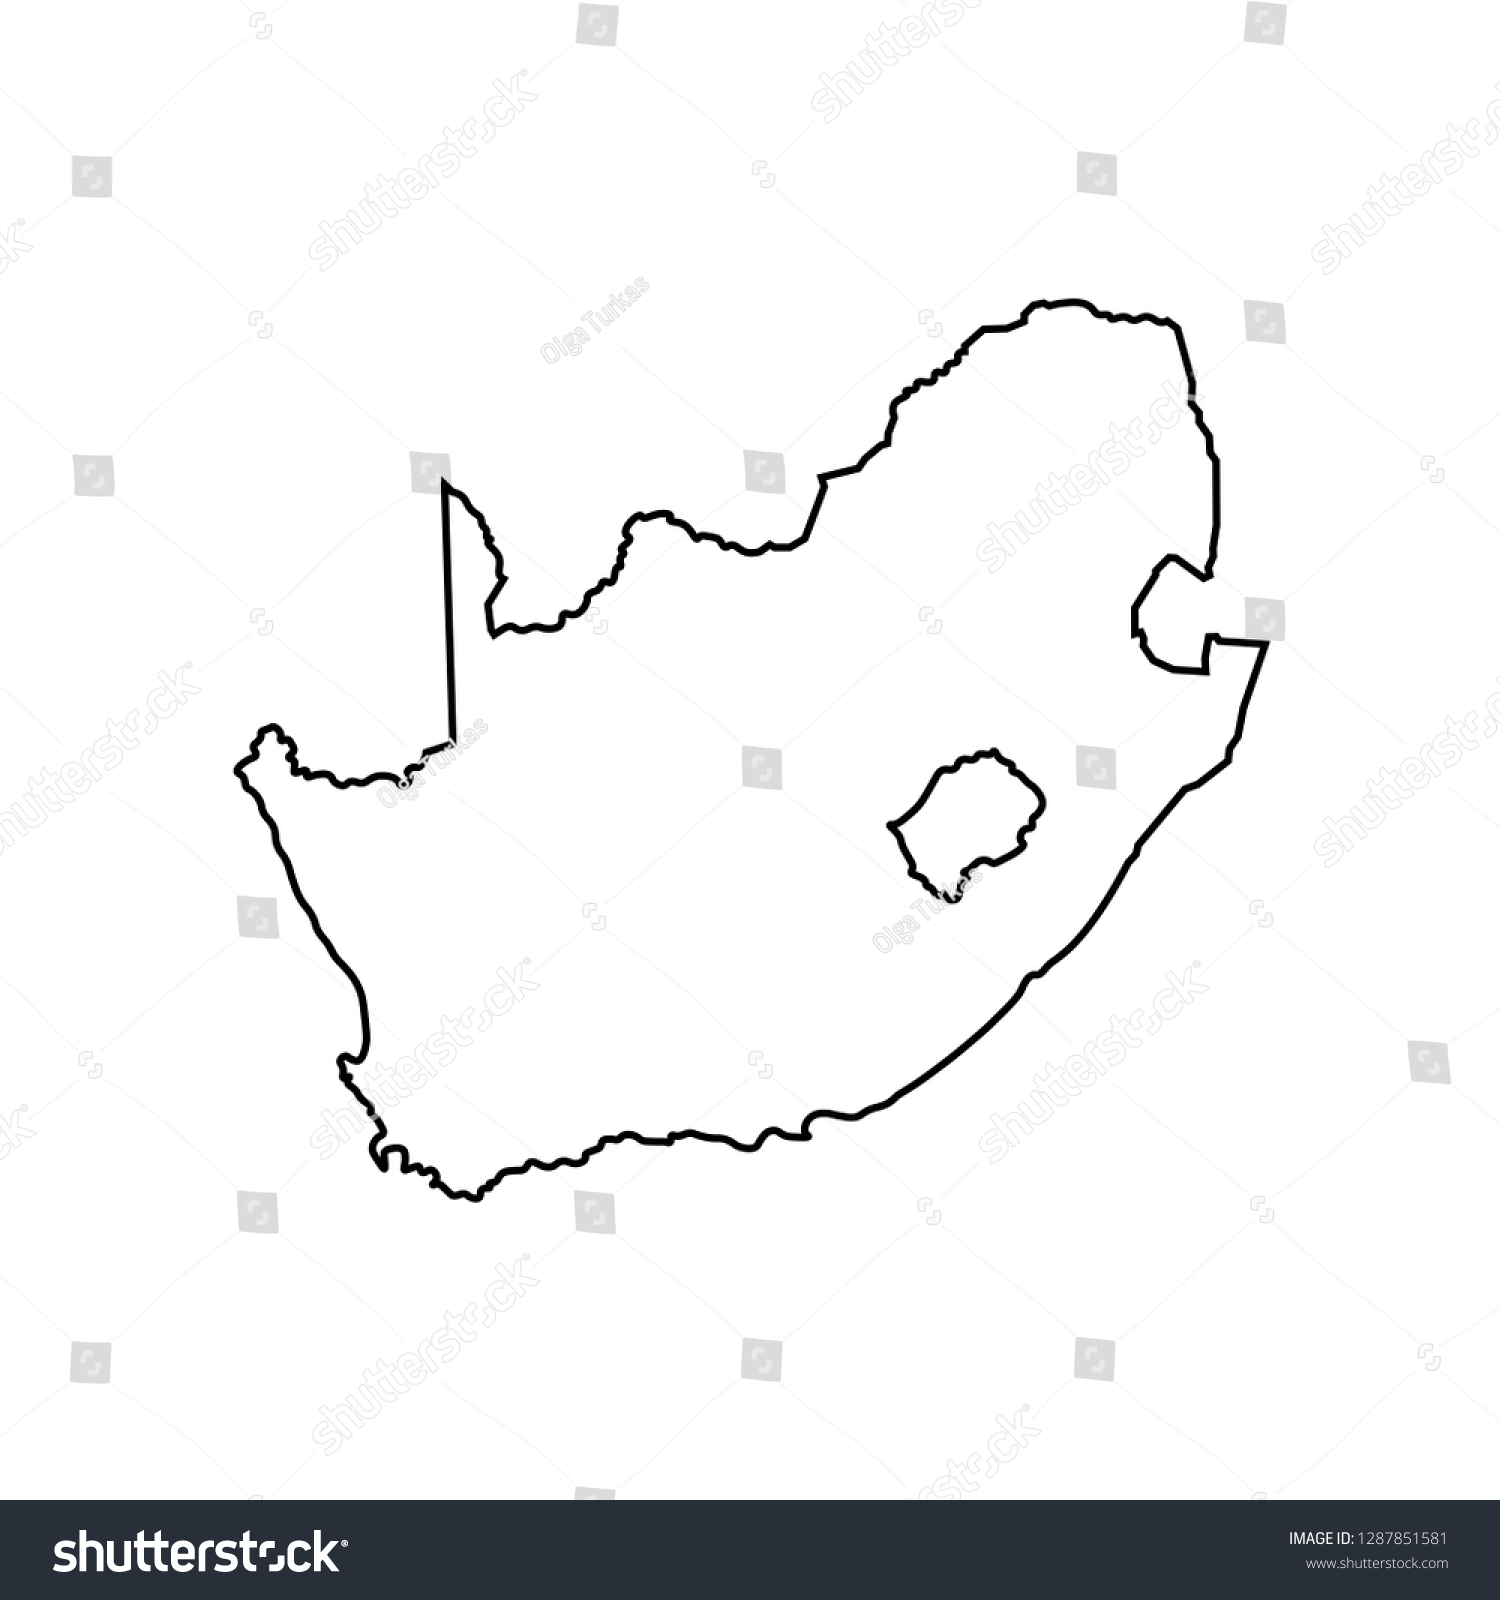 Vector Isolated Illustration Political Map African Stock Vector Royalty Free 1287851581 9410